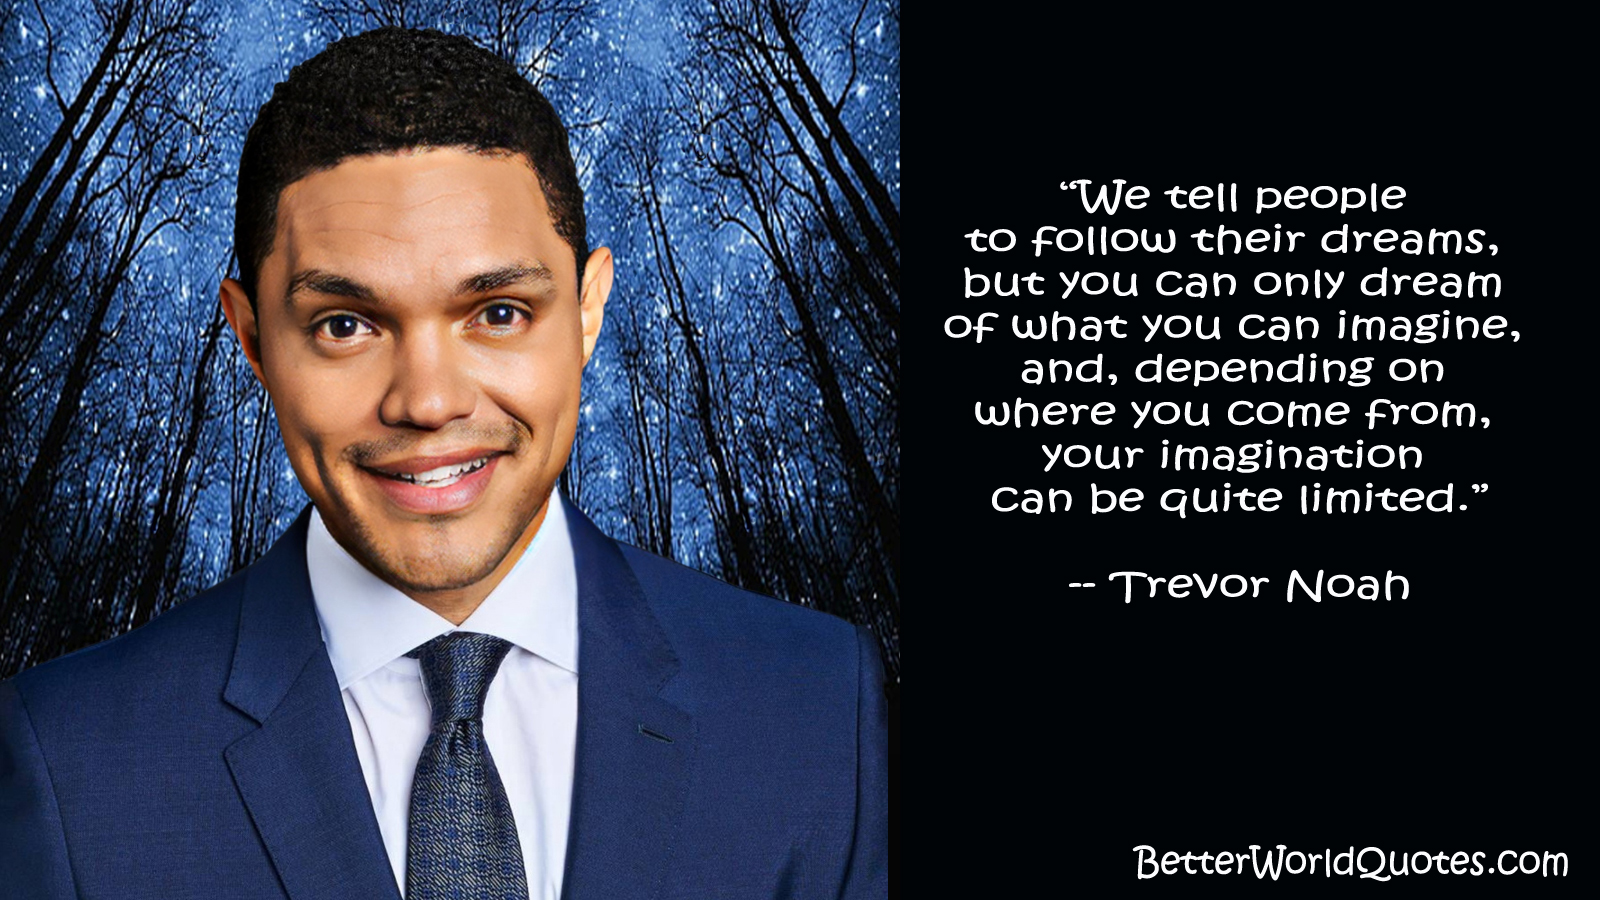 Trevor Noah: We tell people to follow their dreams, but you can only dream of what you can imagine, and, depending on where you come from, your imagination can be quite limited.